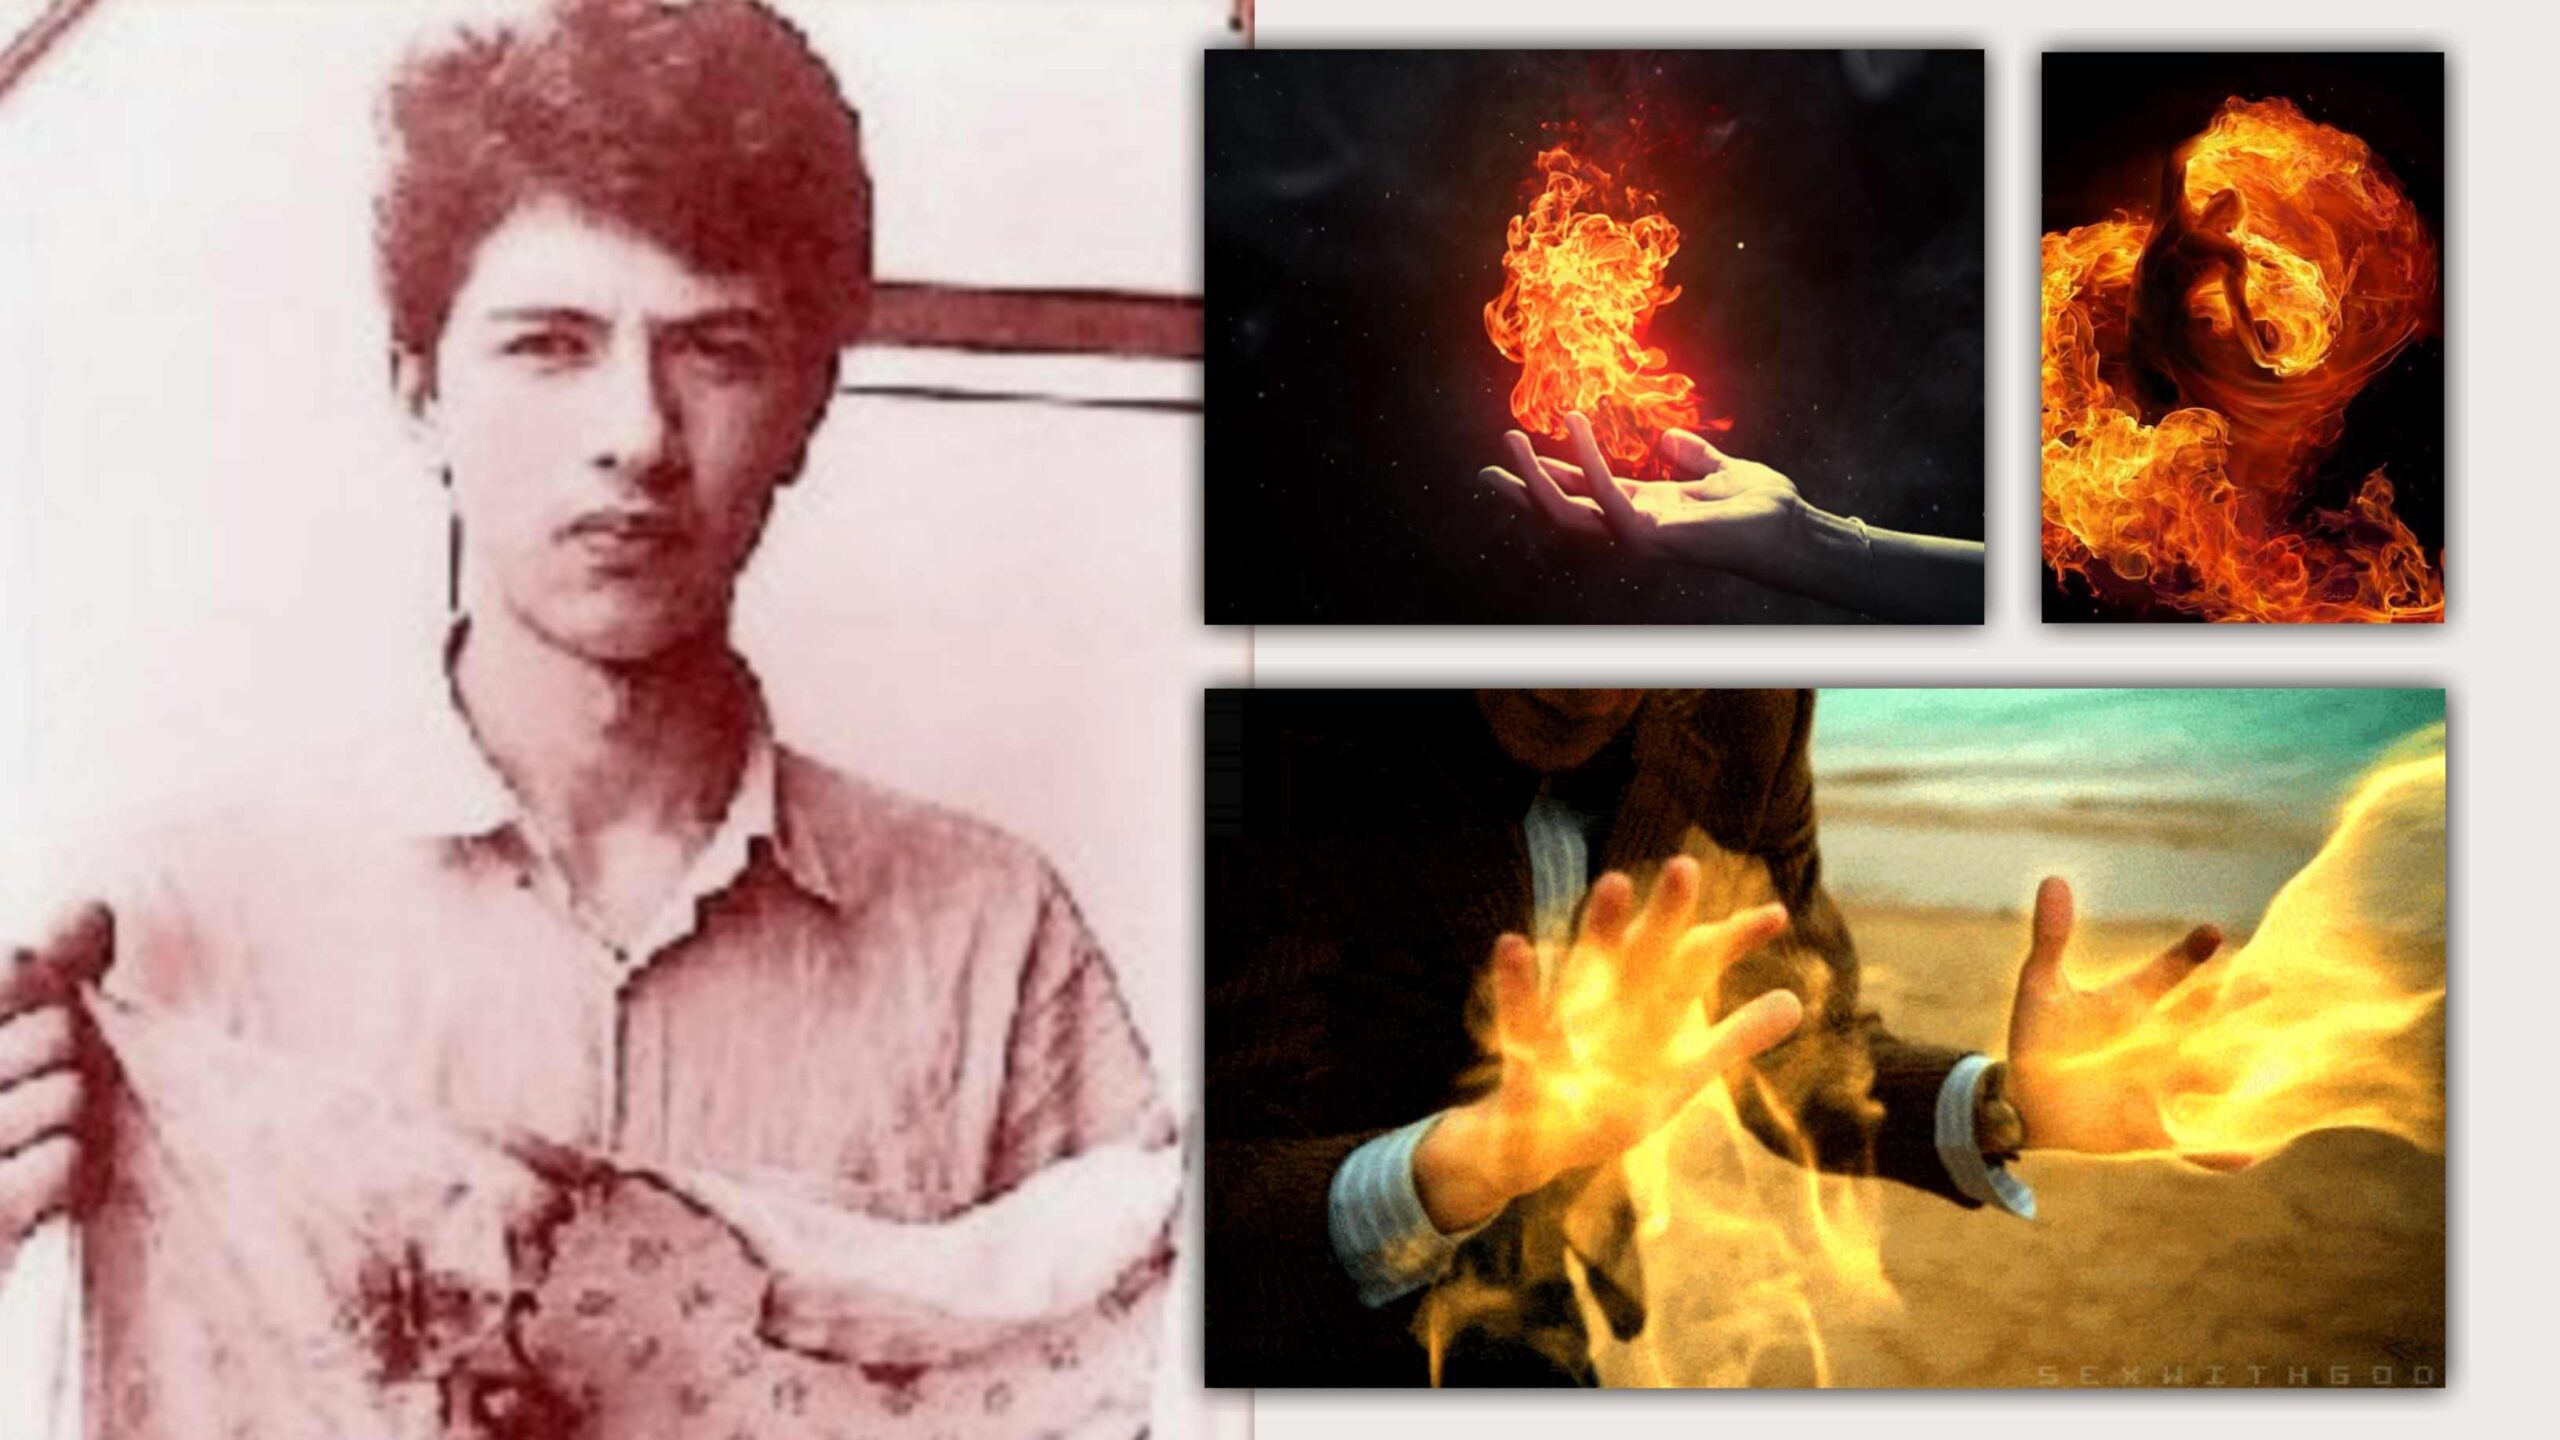 Benedetto Supino: An Italian boy who could set things 'ablaze' by just staring at them 2